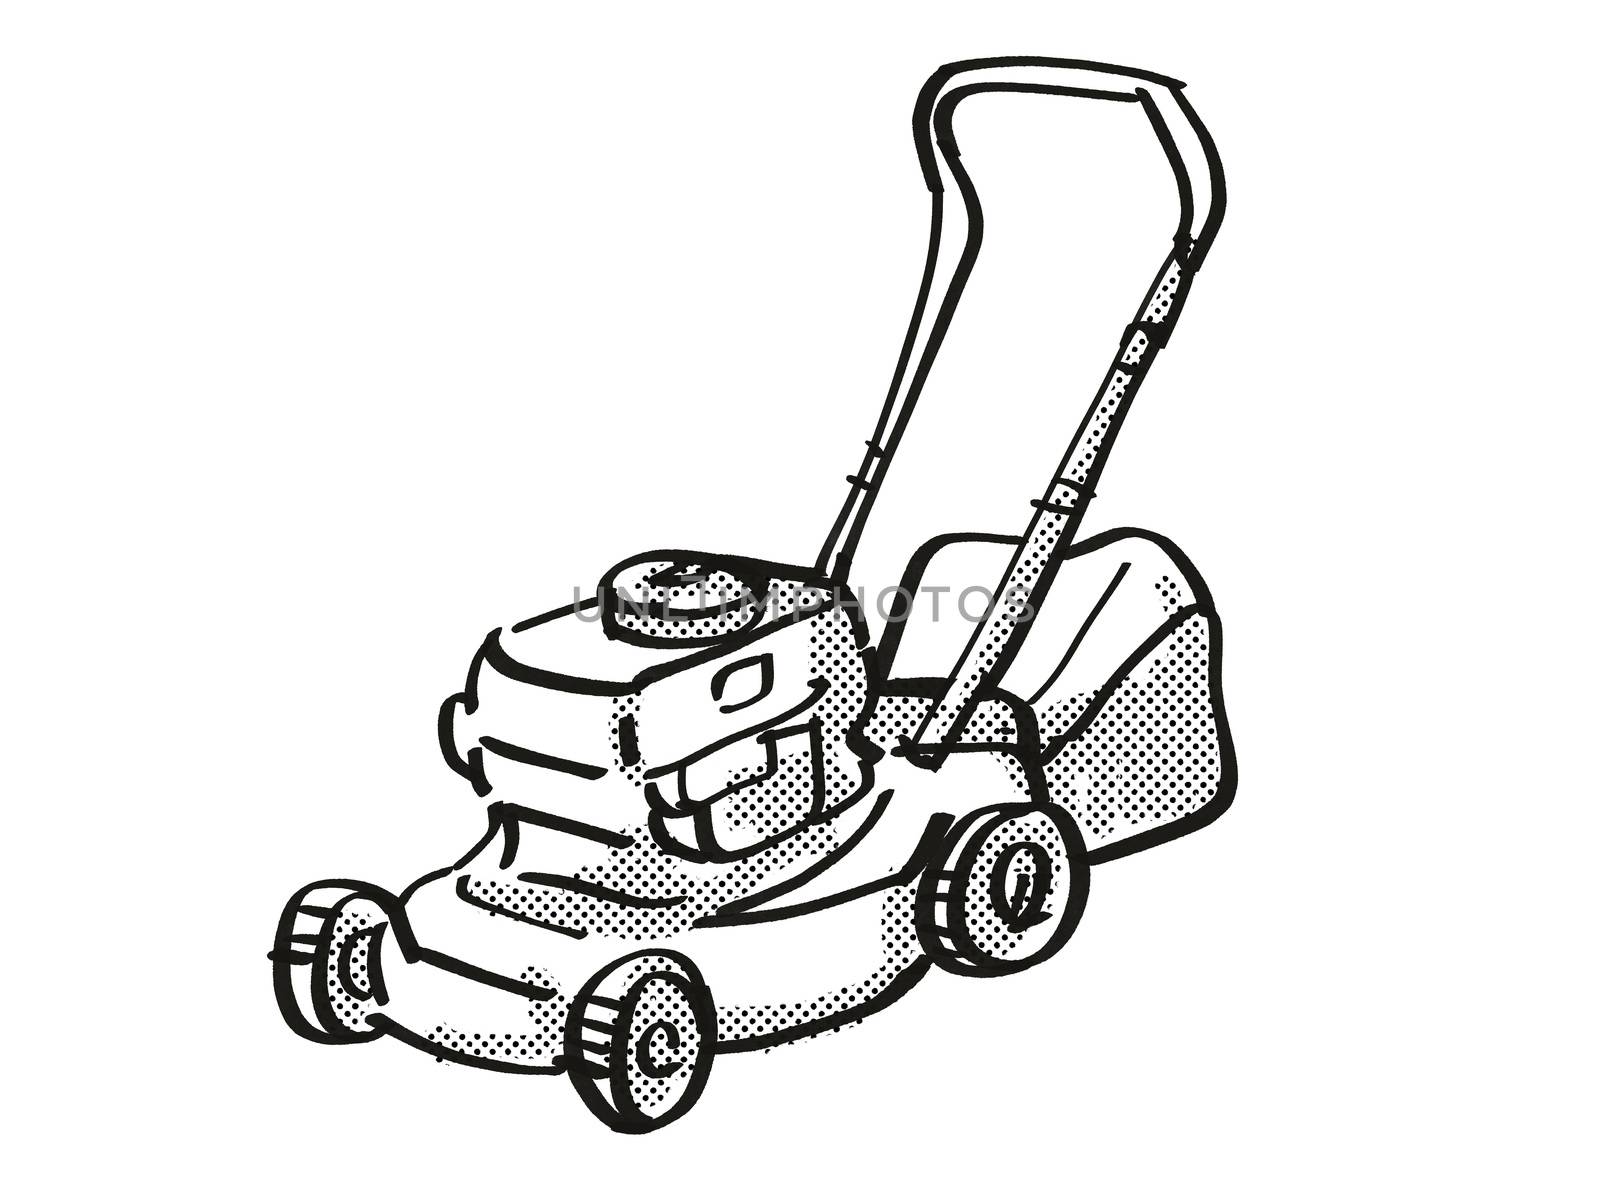 Retro cartoon style drawing of a lawn mower on isolated white background done in black and white.